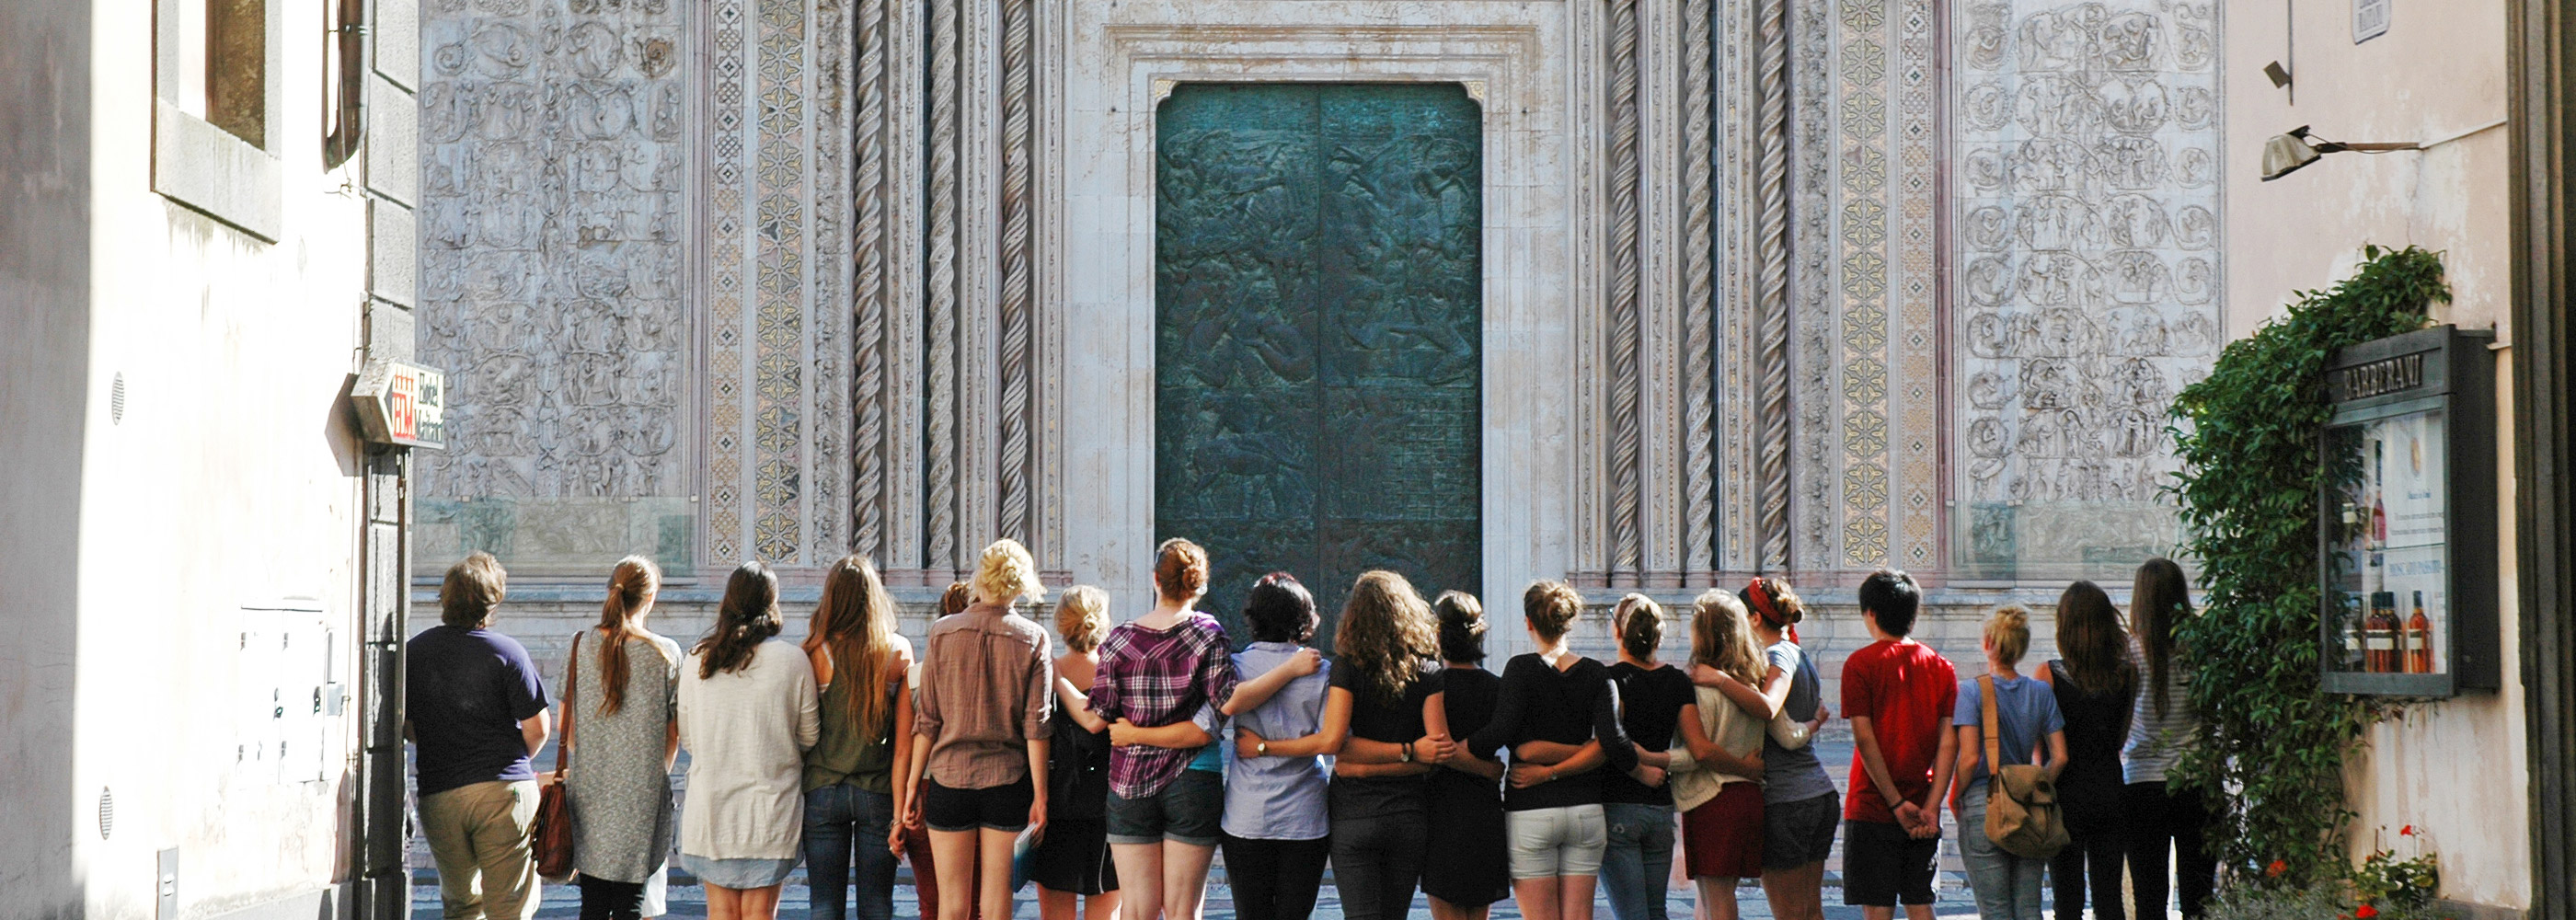 Orvieto students linking arms in front of Duomo